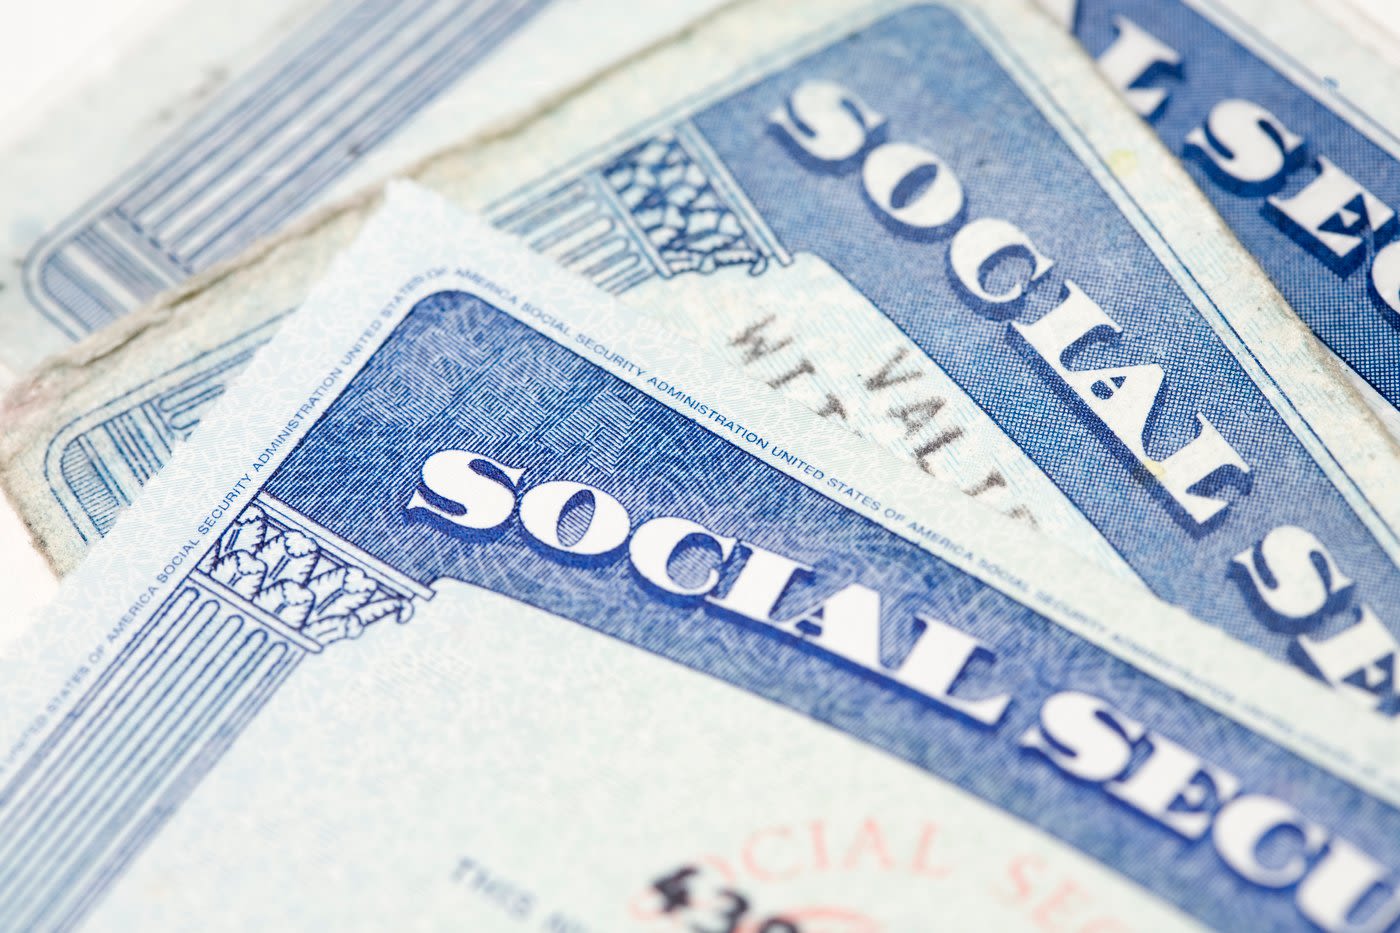 Joe Biden Wants to Strengthen Social Security. Will This Solution Force You to Delay Your Retirement?